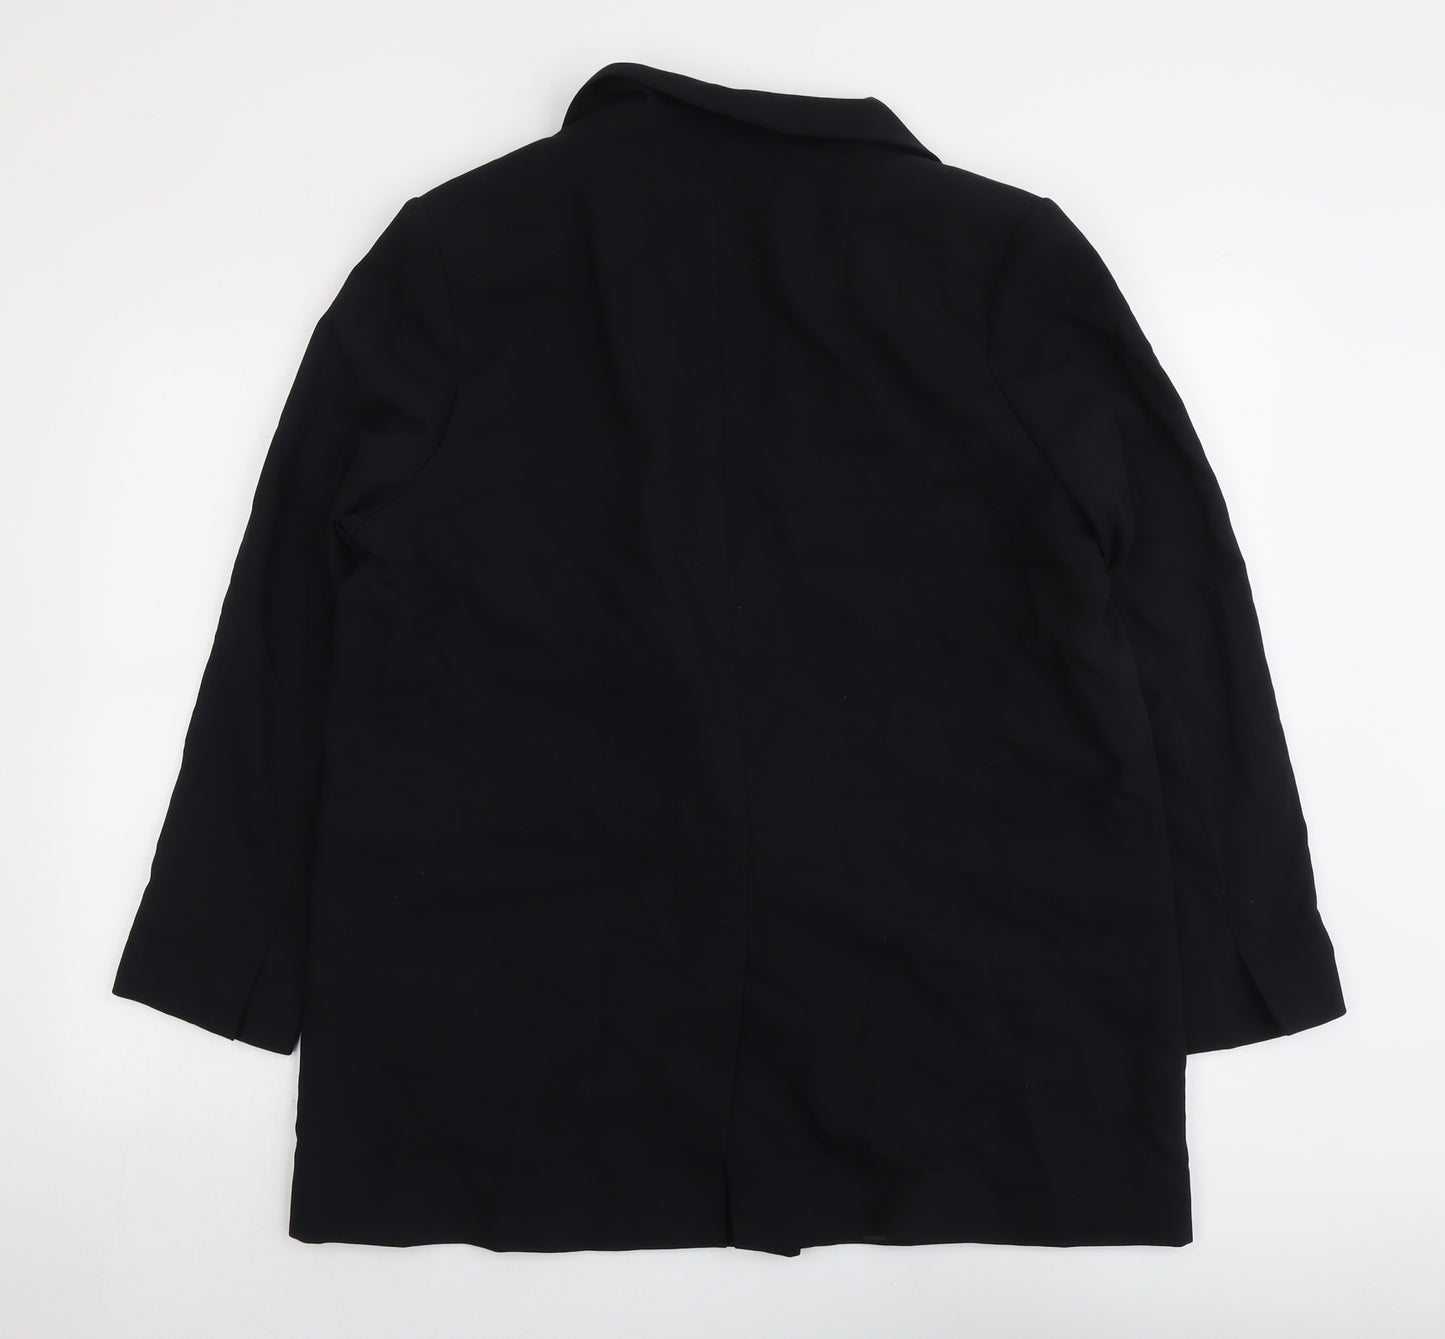 Marks and Spencer Womens Black Polyester Jacket Suit Jacket Size 16